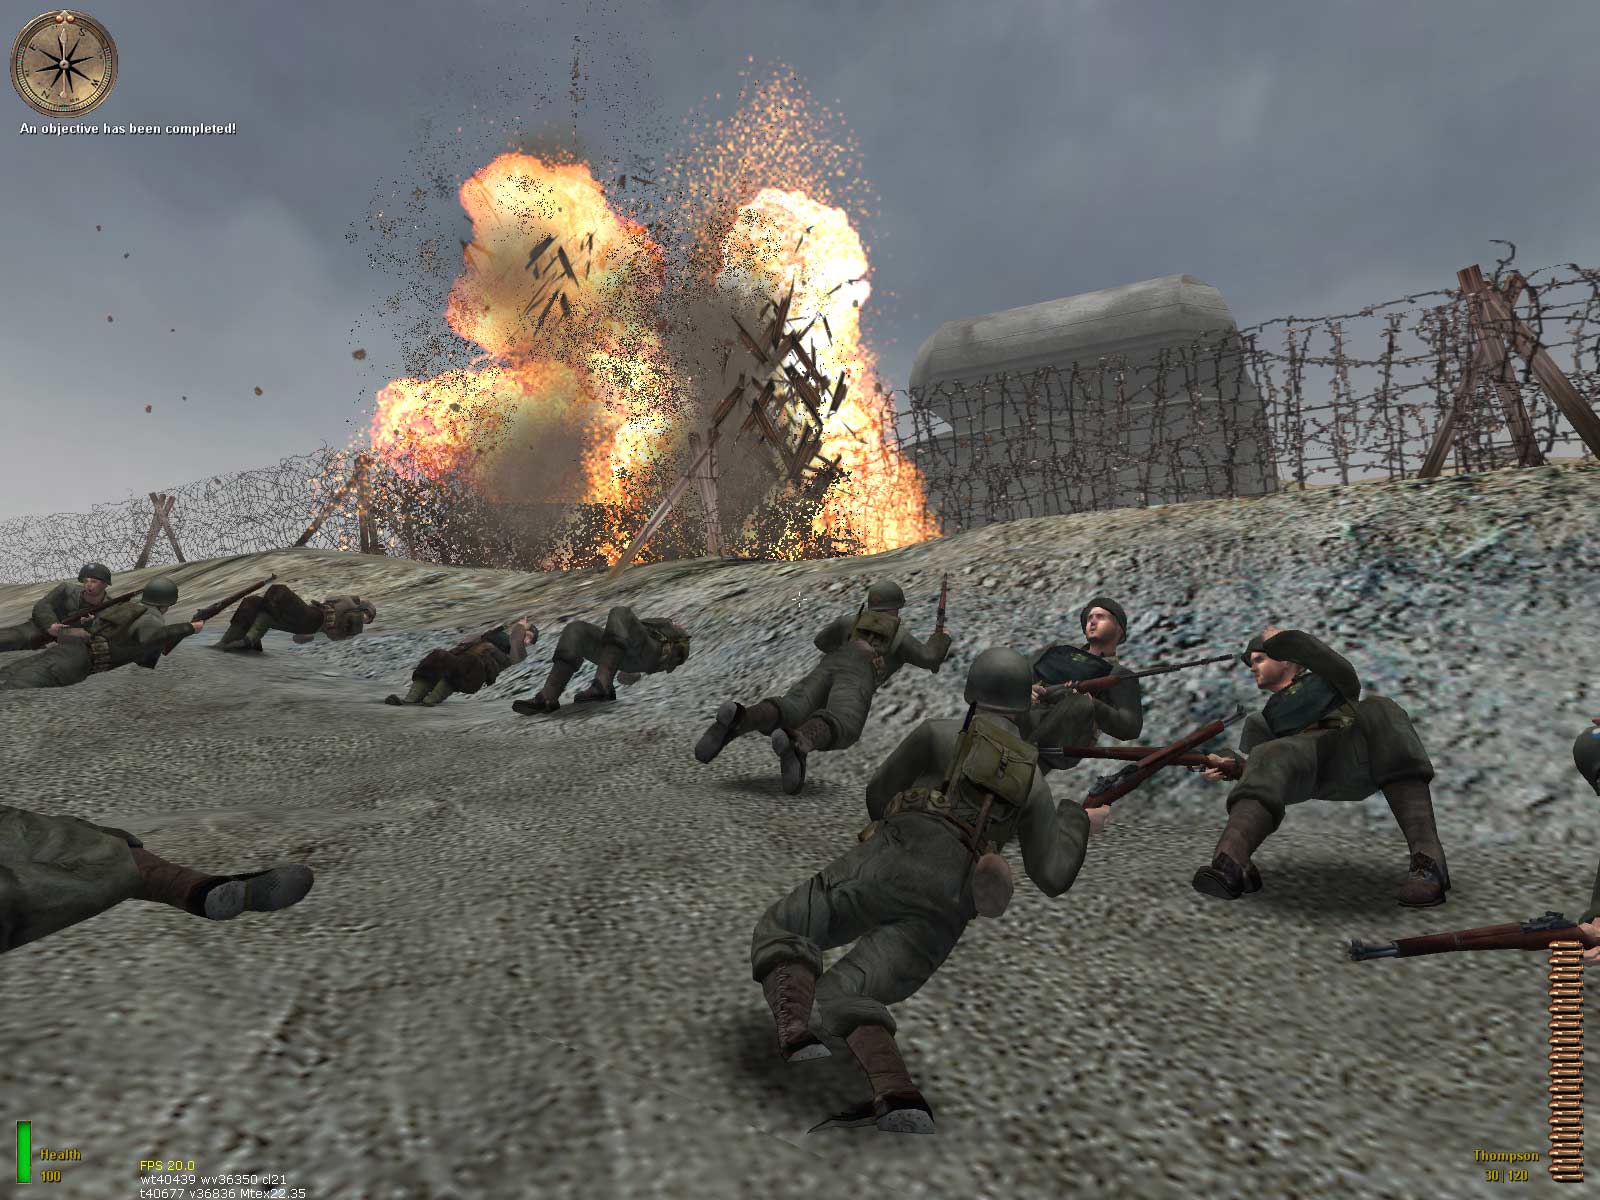 Medal of Honor: Allied Assault - Metacritic